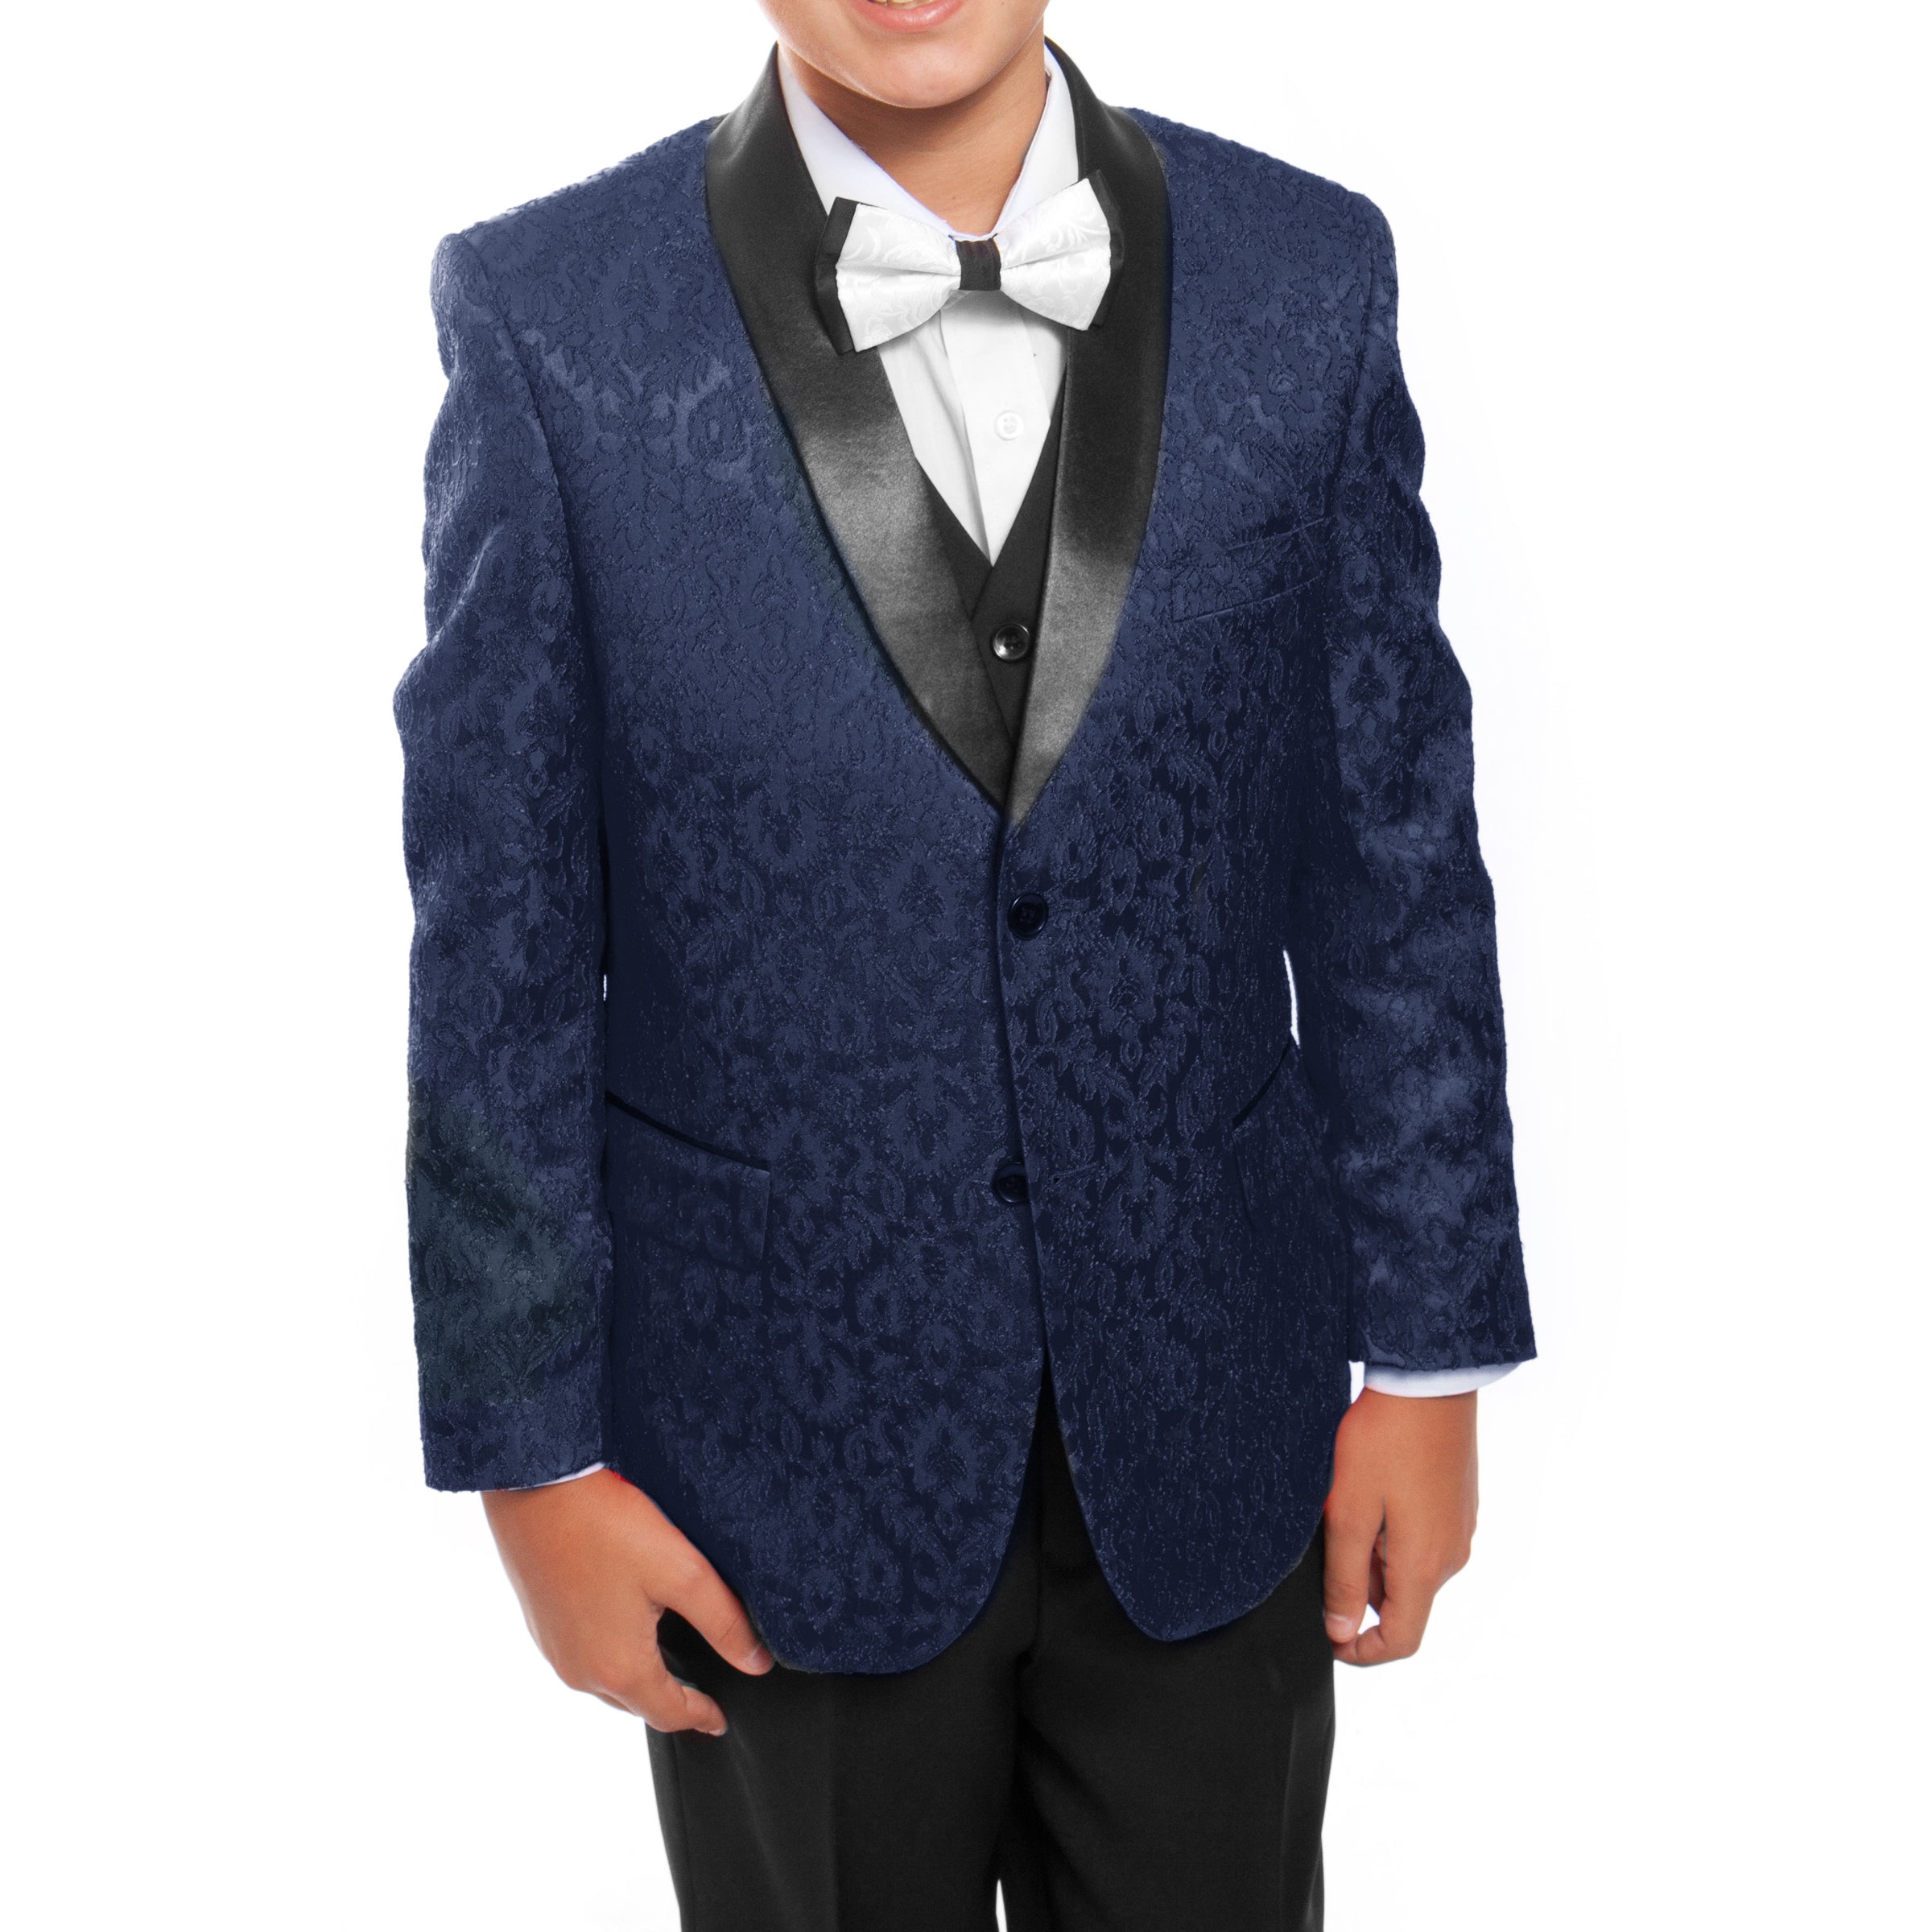 Tazio Navy / Black Formal Suits For Boys